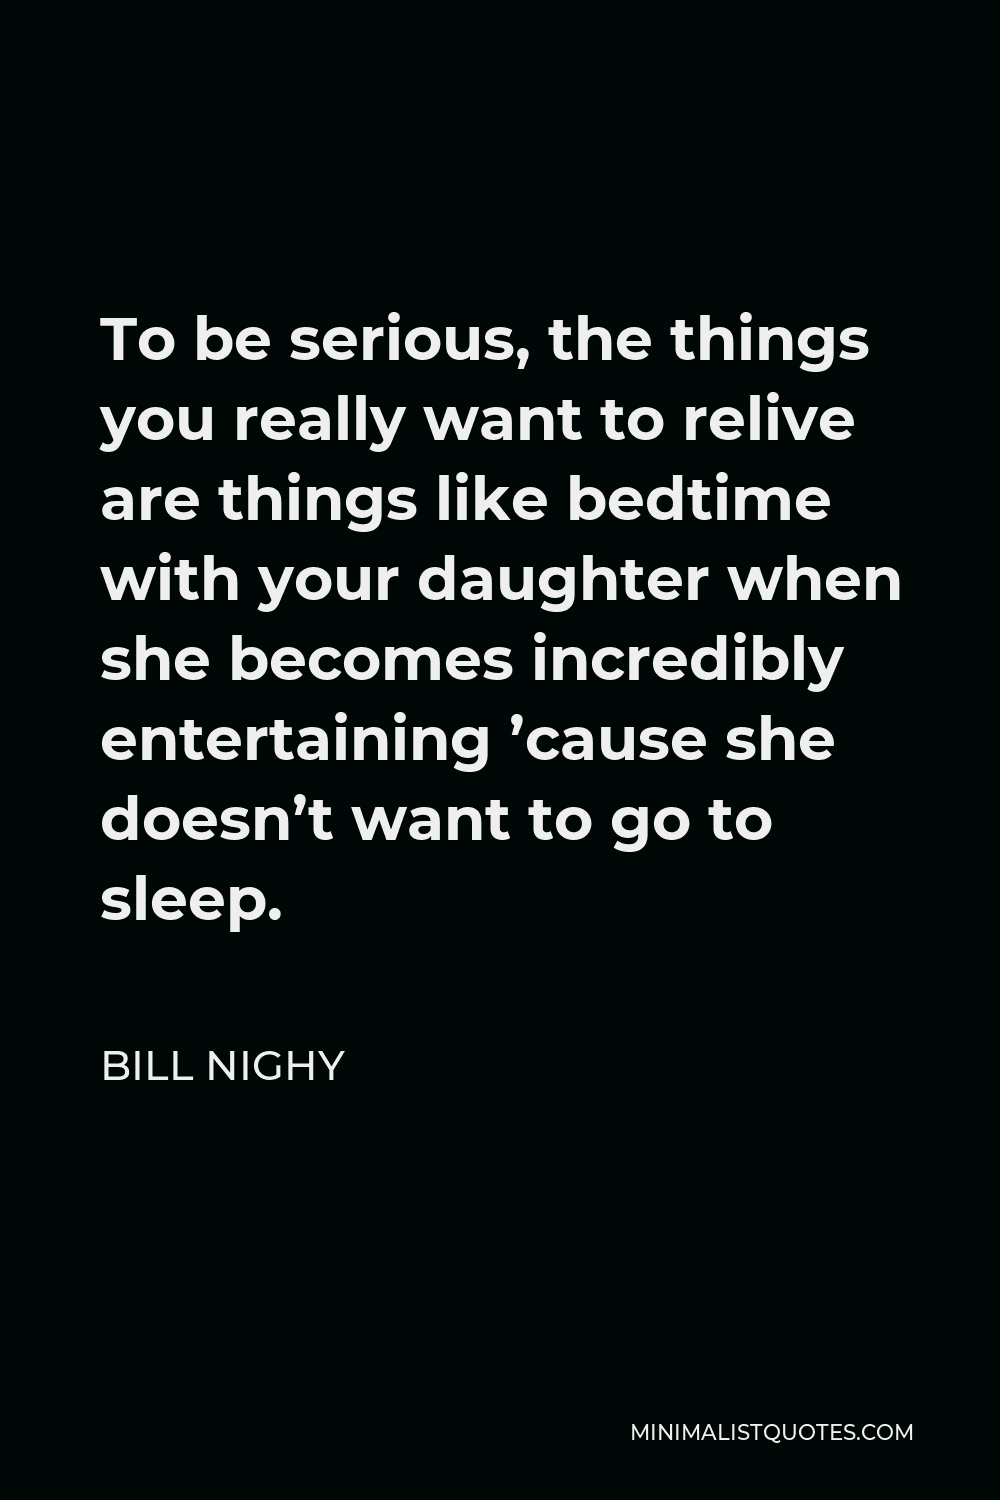 Bill Nighy Quote - To be serious, the things you really want to relive are things like bedtime with your daughter when she becomes incredibly entertaining ’cause she doesn’t want to go to sleep.